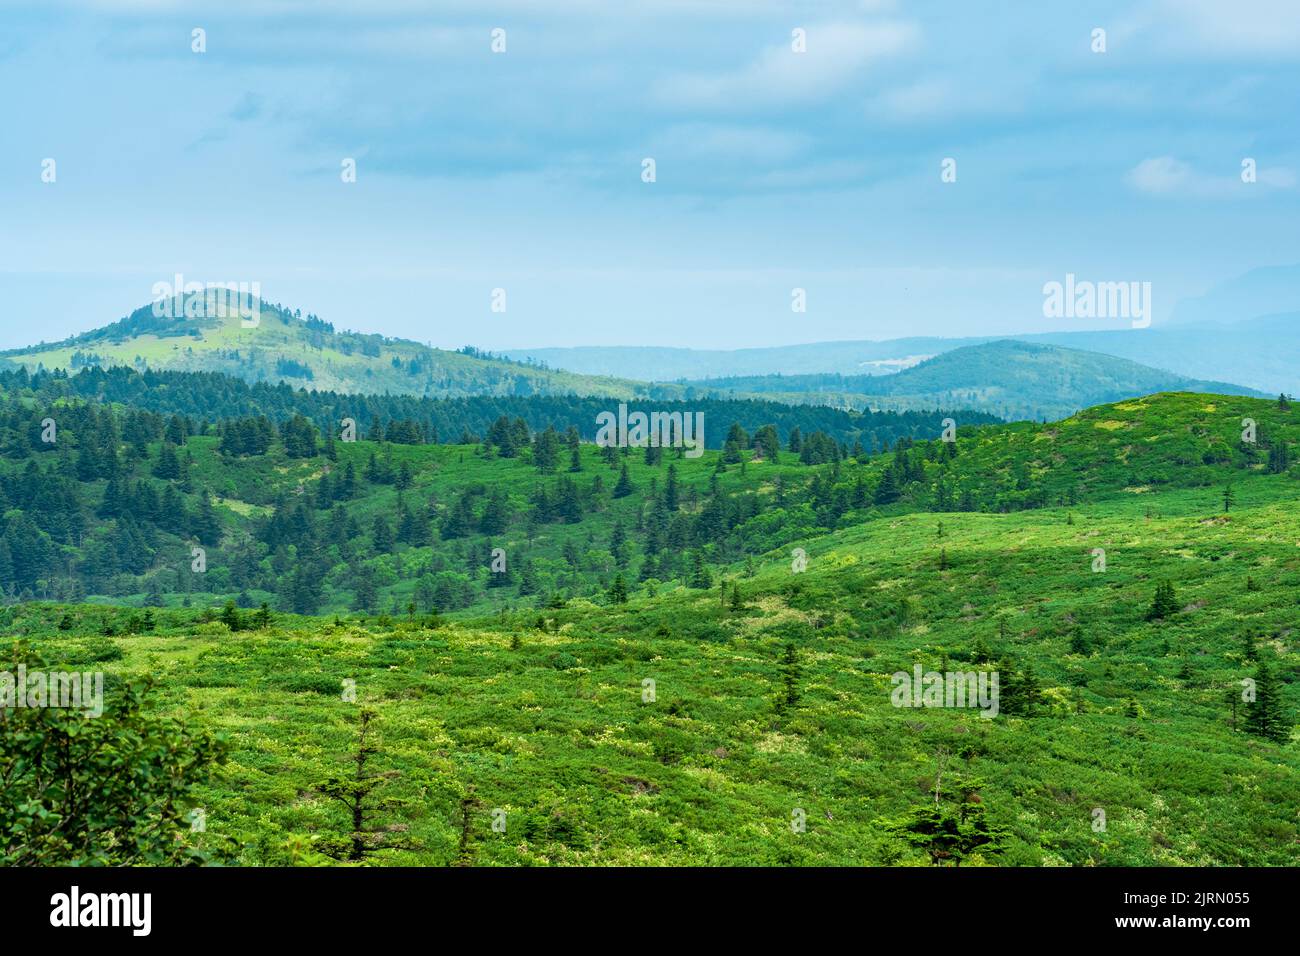 thickets of sasa bamboo and dwarf pines on the hills on Kunashir island, natural seaside insular landscape Stock Photo